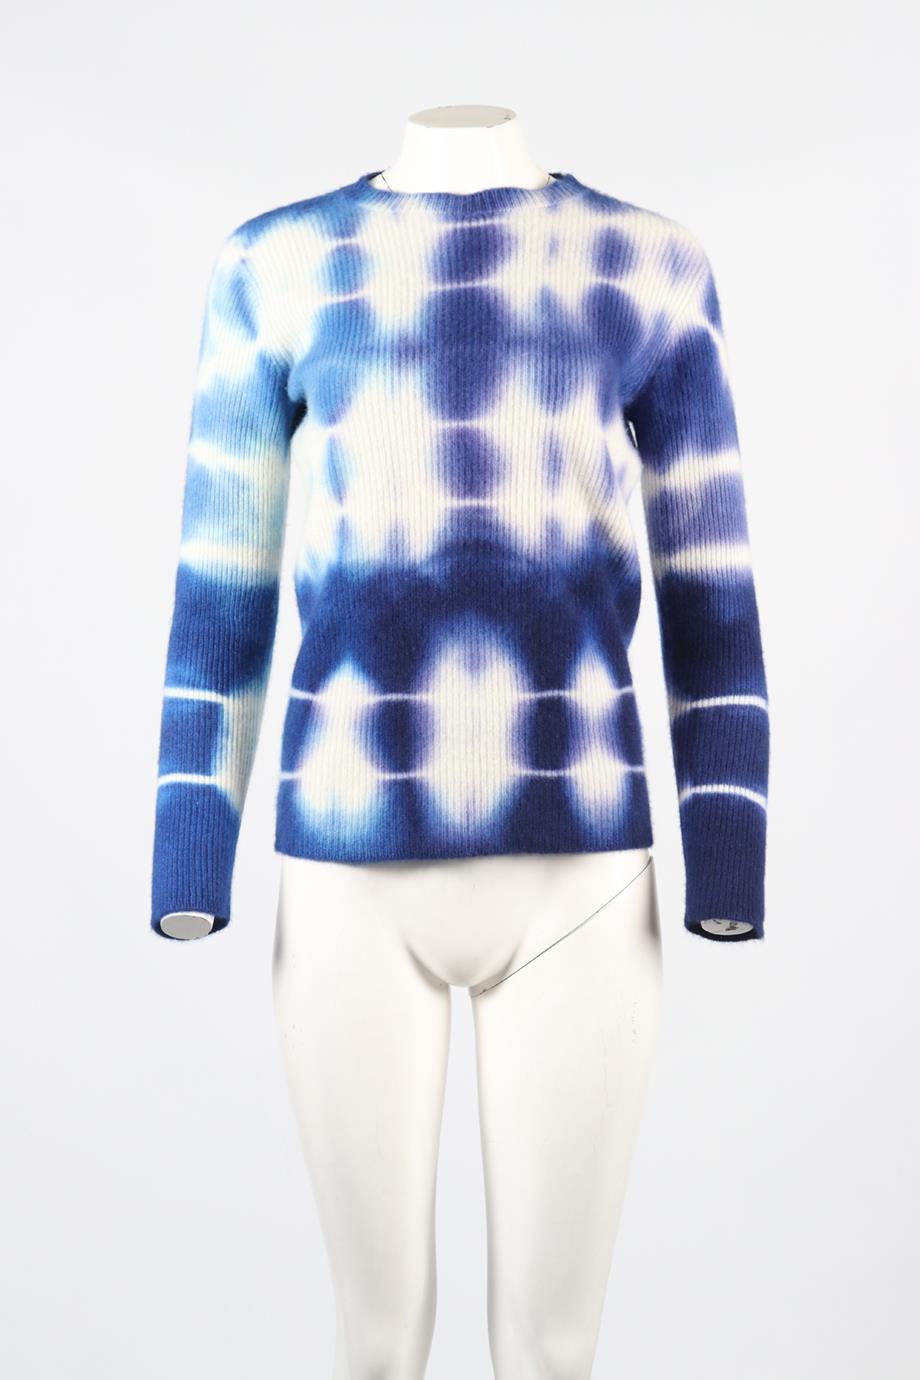 THE ELDER STATESMAN TIE DYED CASHMERE SWEATER XSMALL